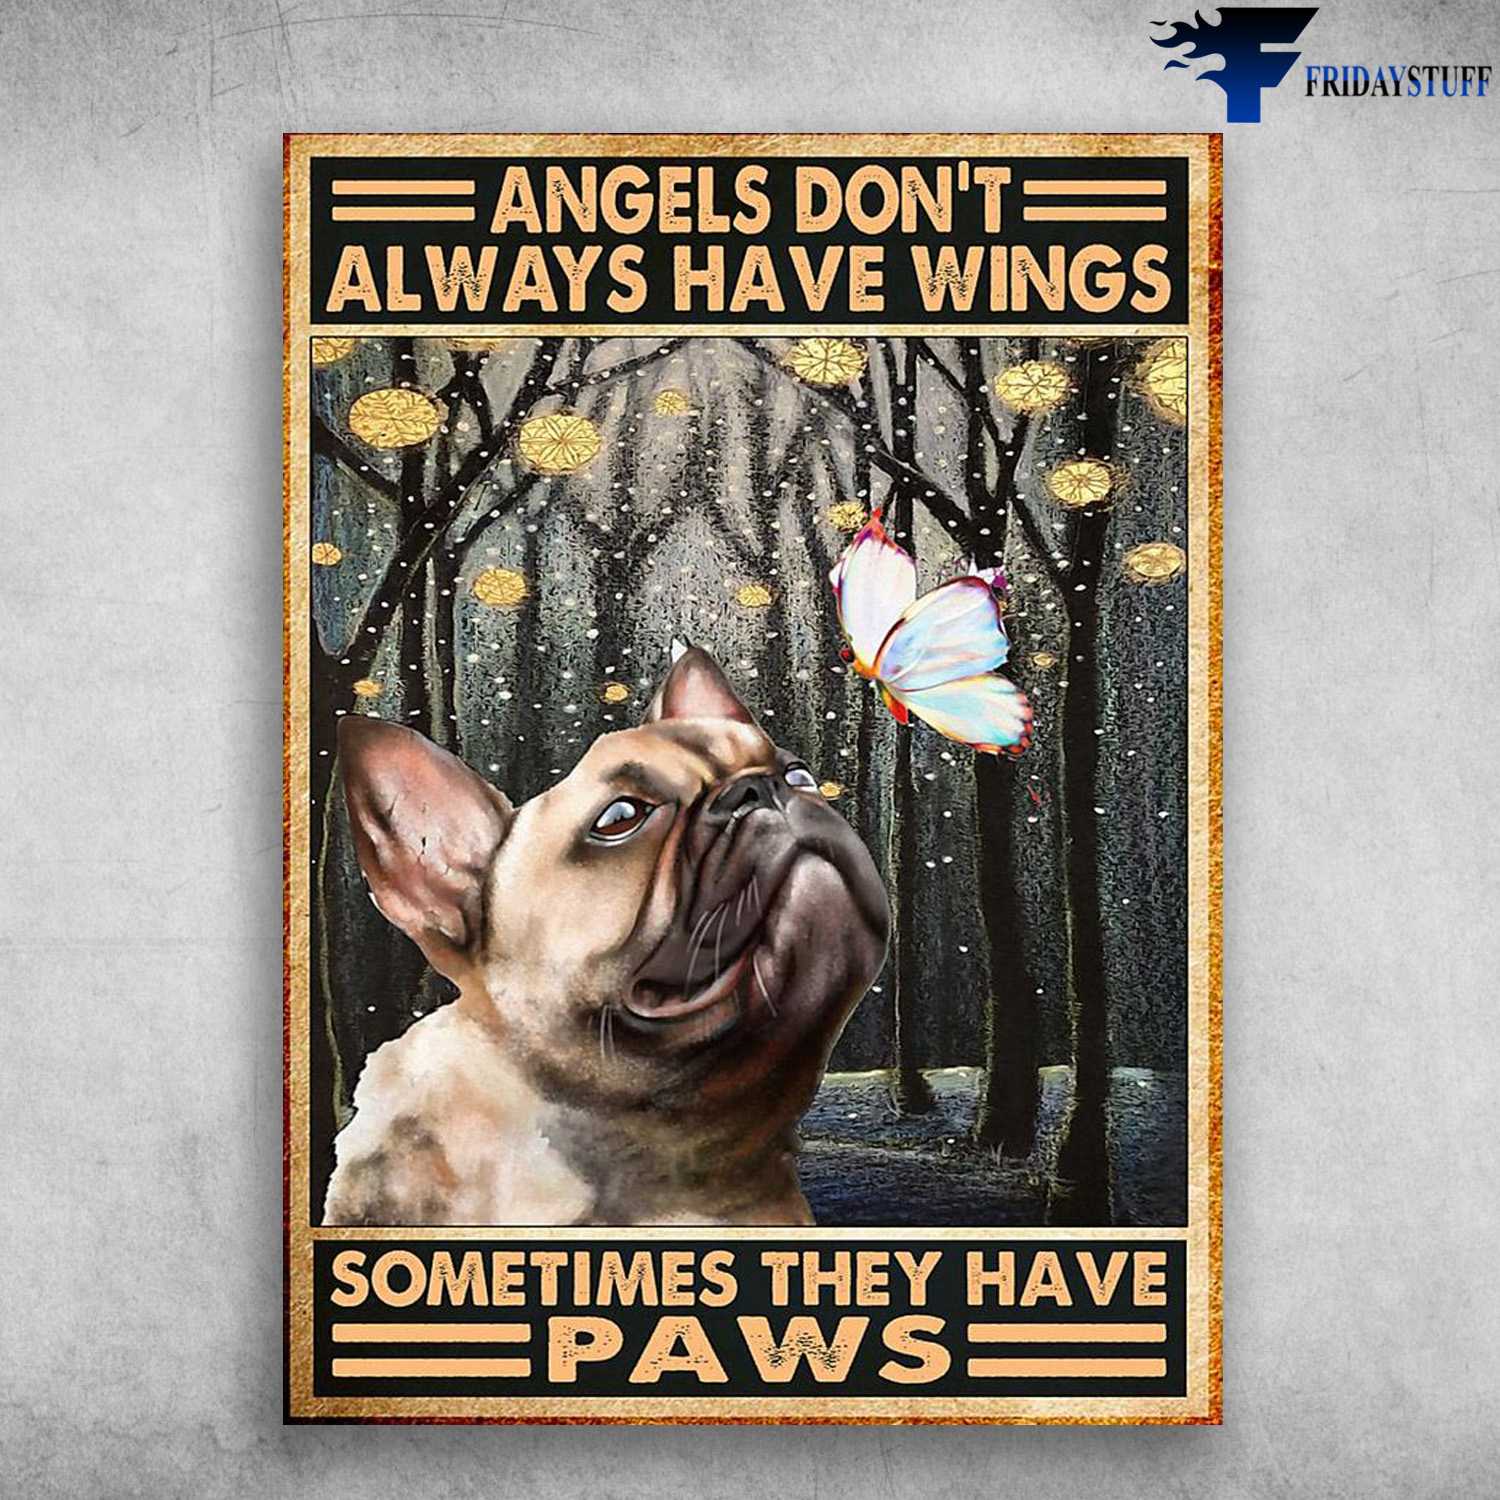 Pug Dog, Dog And Butterfly, Winter Poster, Angels Don't Always Have Wings, Sometimes They Have Paws